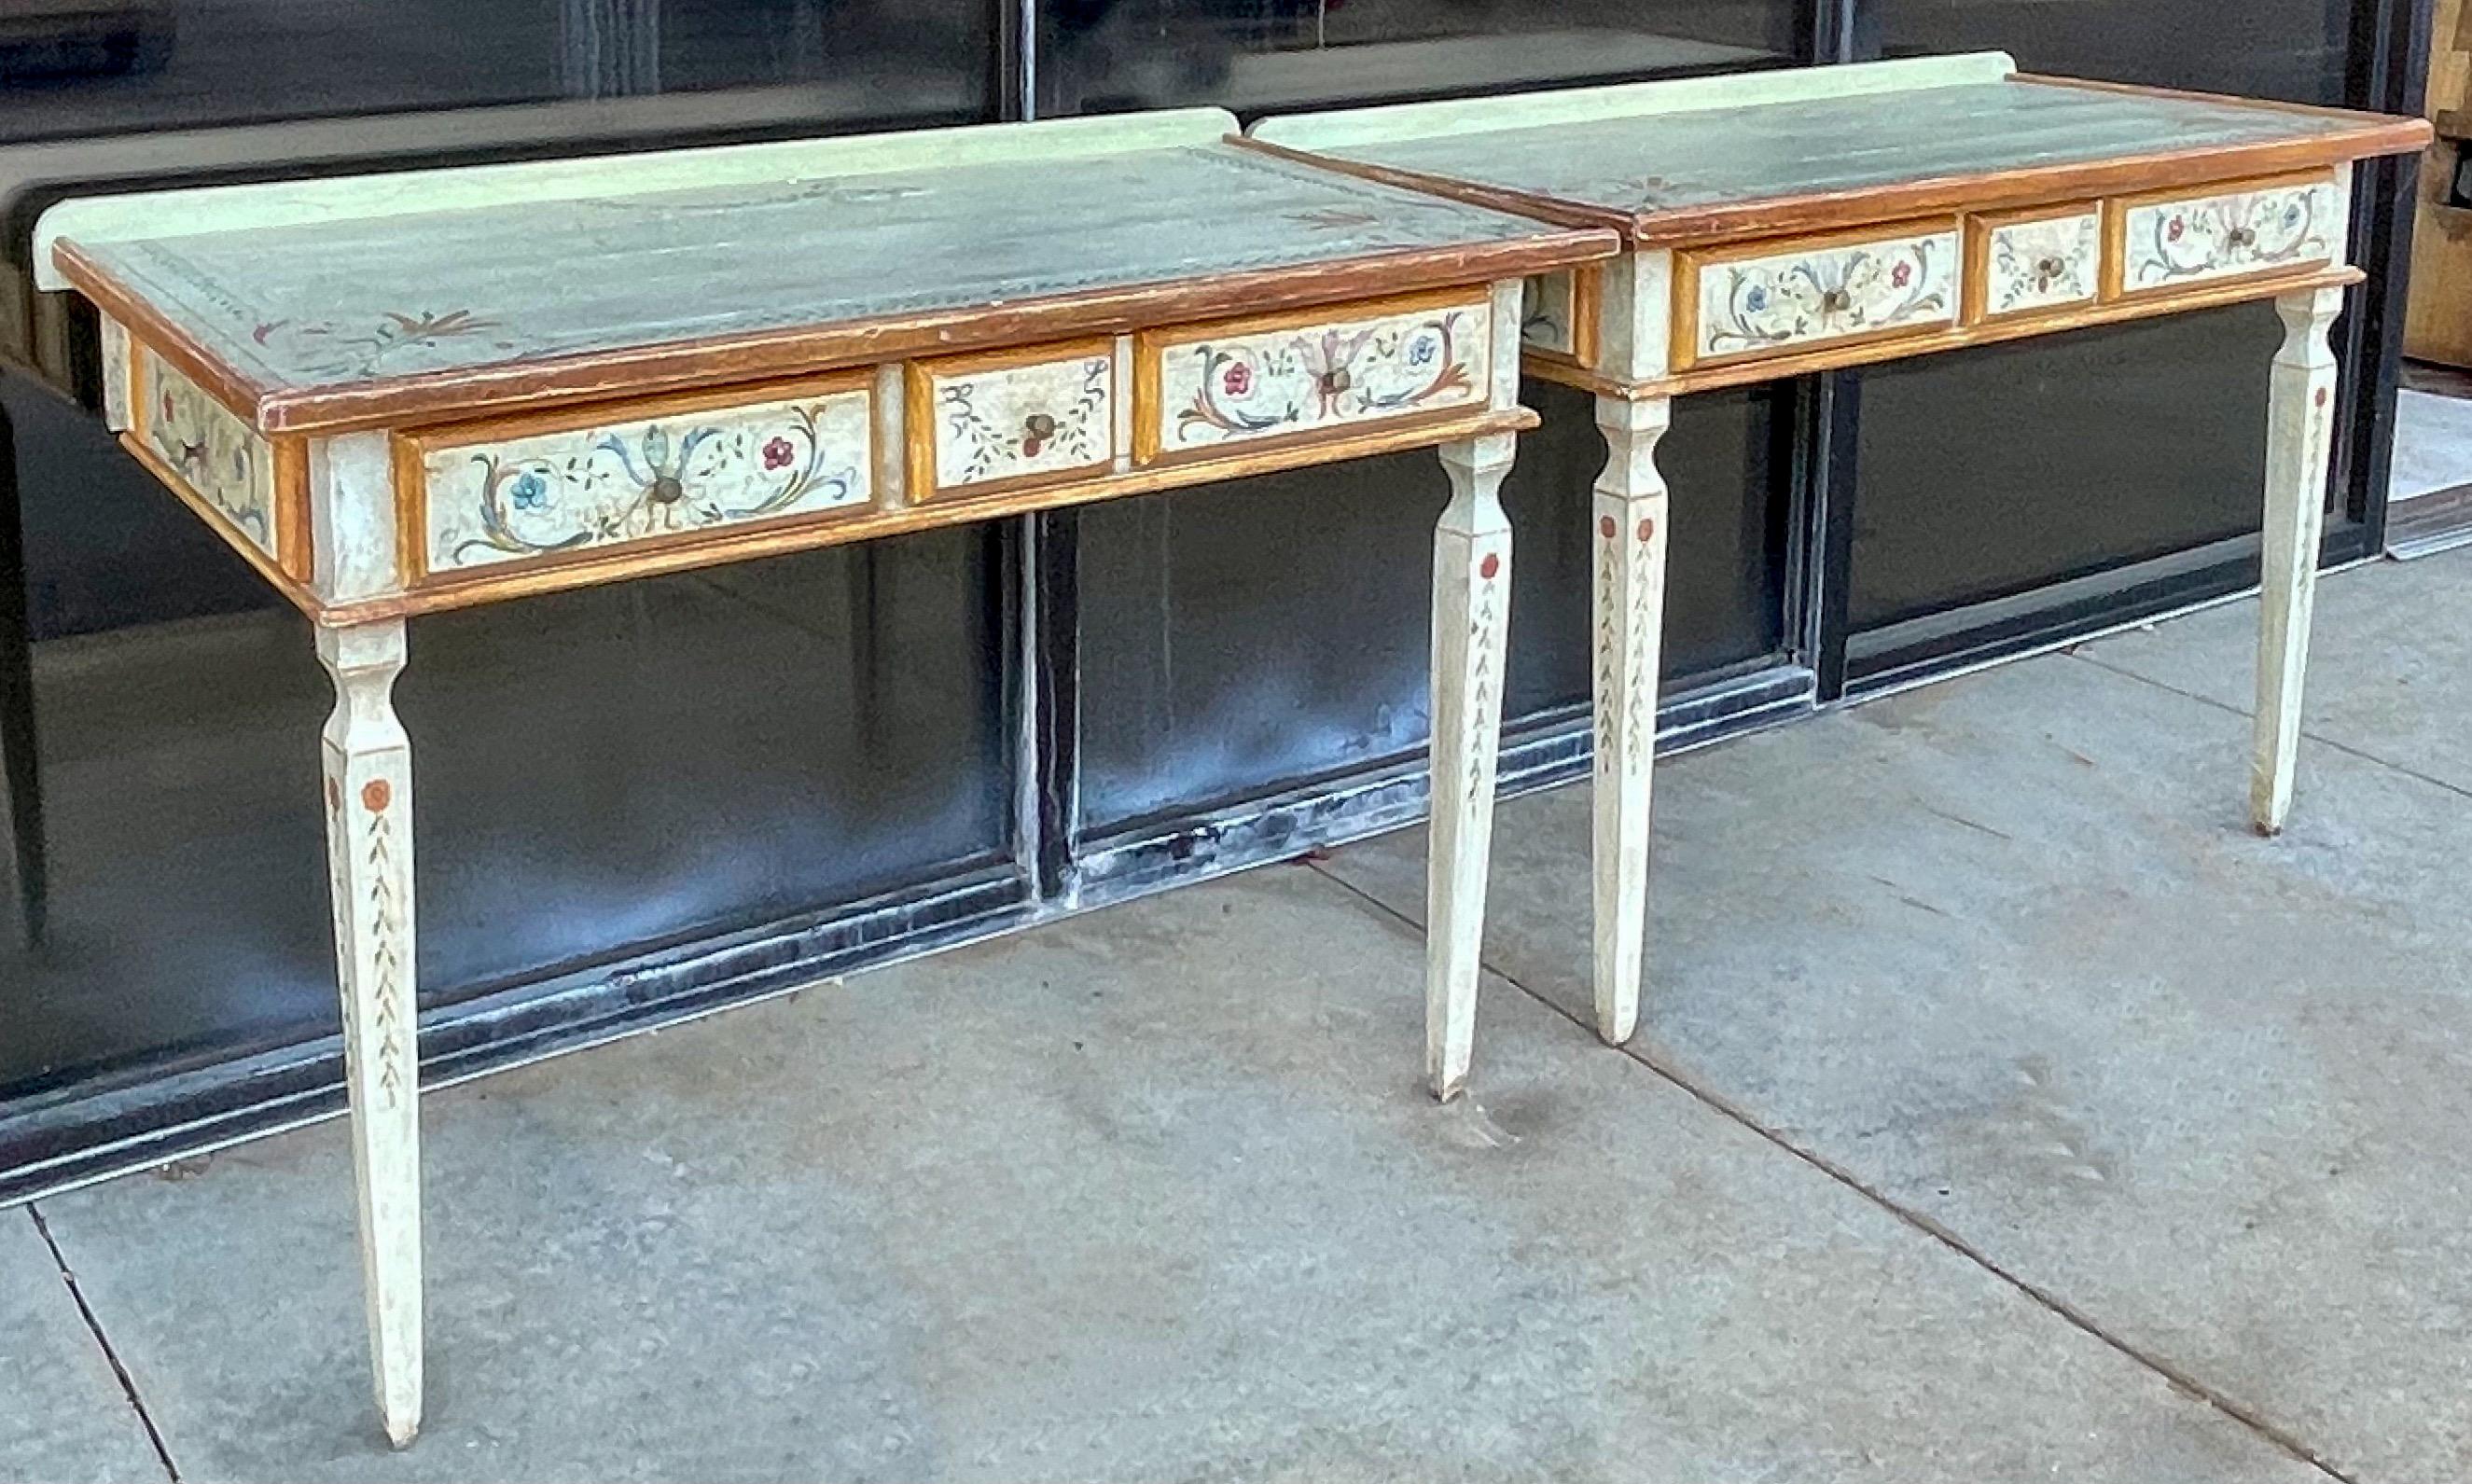 This is a pair of Venetian style hand painted console tables or desks by Niermann Weeks. They are marked and have some intentional distressing. Note the paper lined drawers! From bedside to foyer, these provide many options.